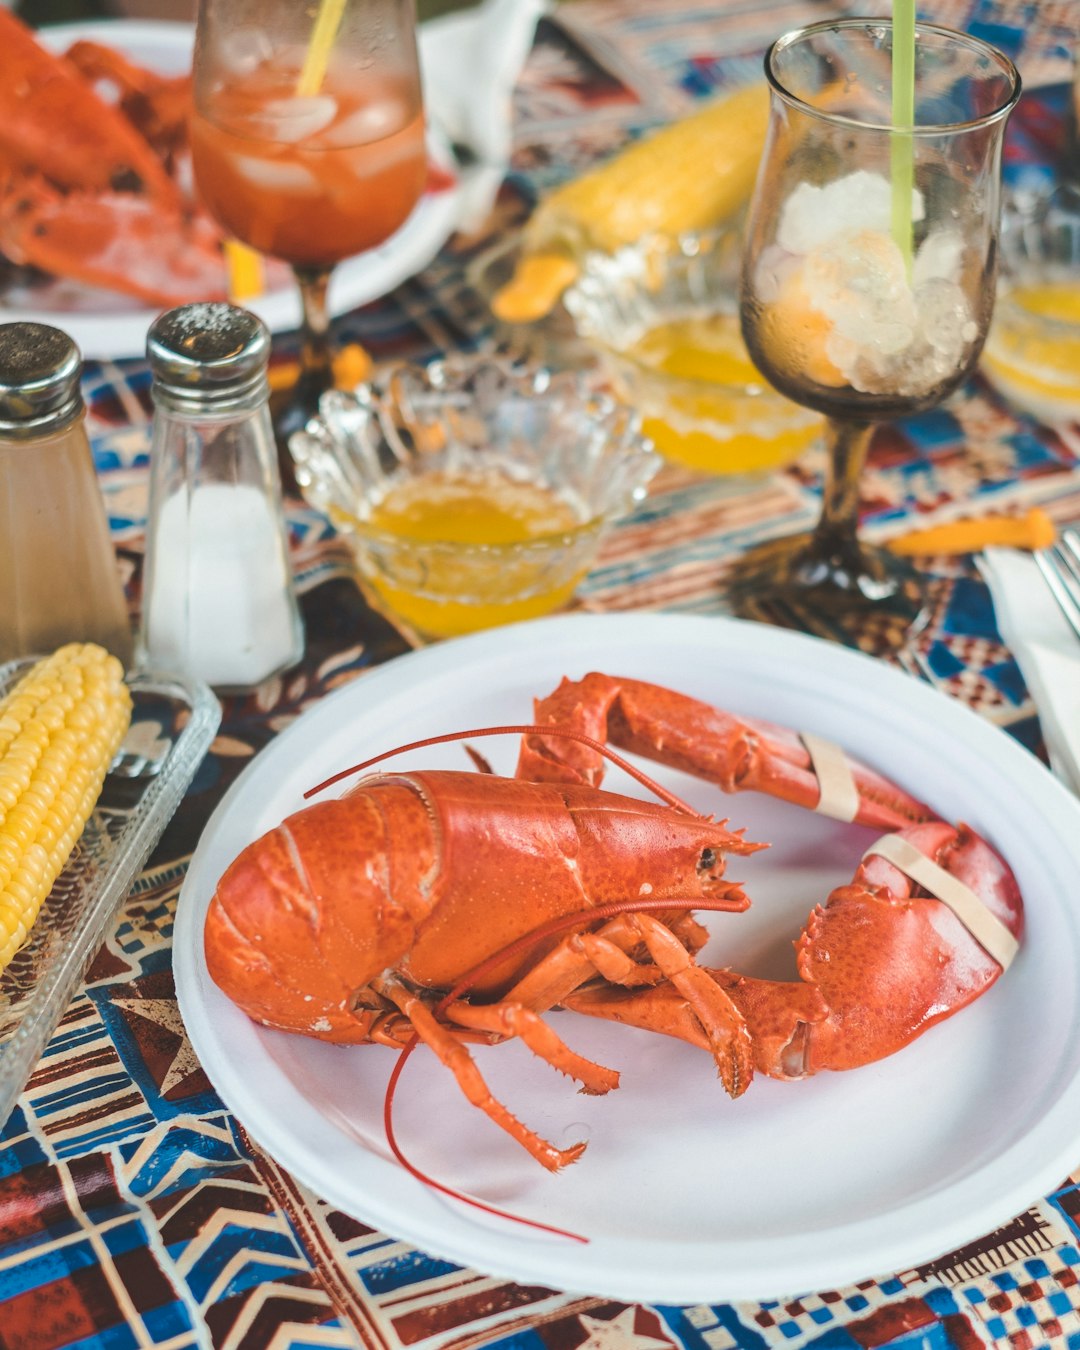 The History and Significance of Live Lobster – A Louisiana Delicacy